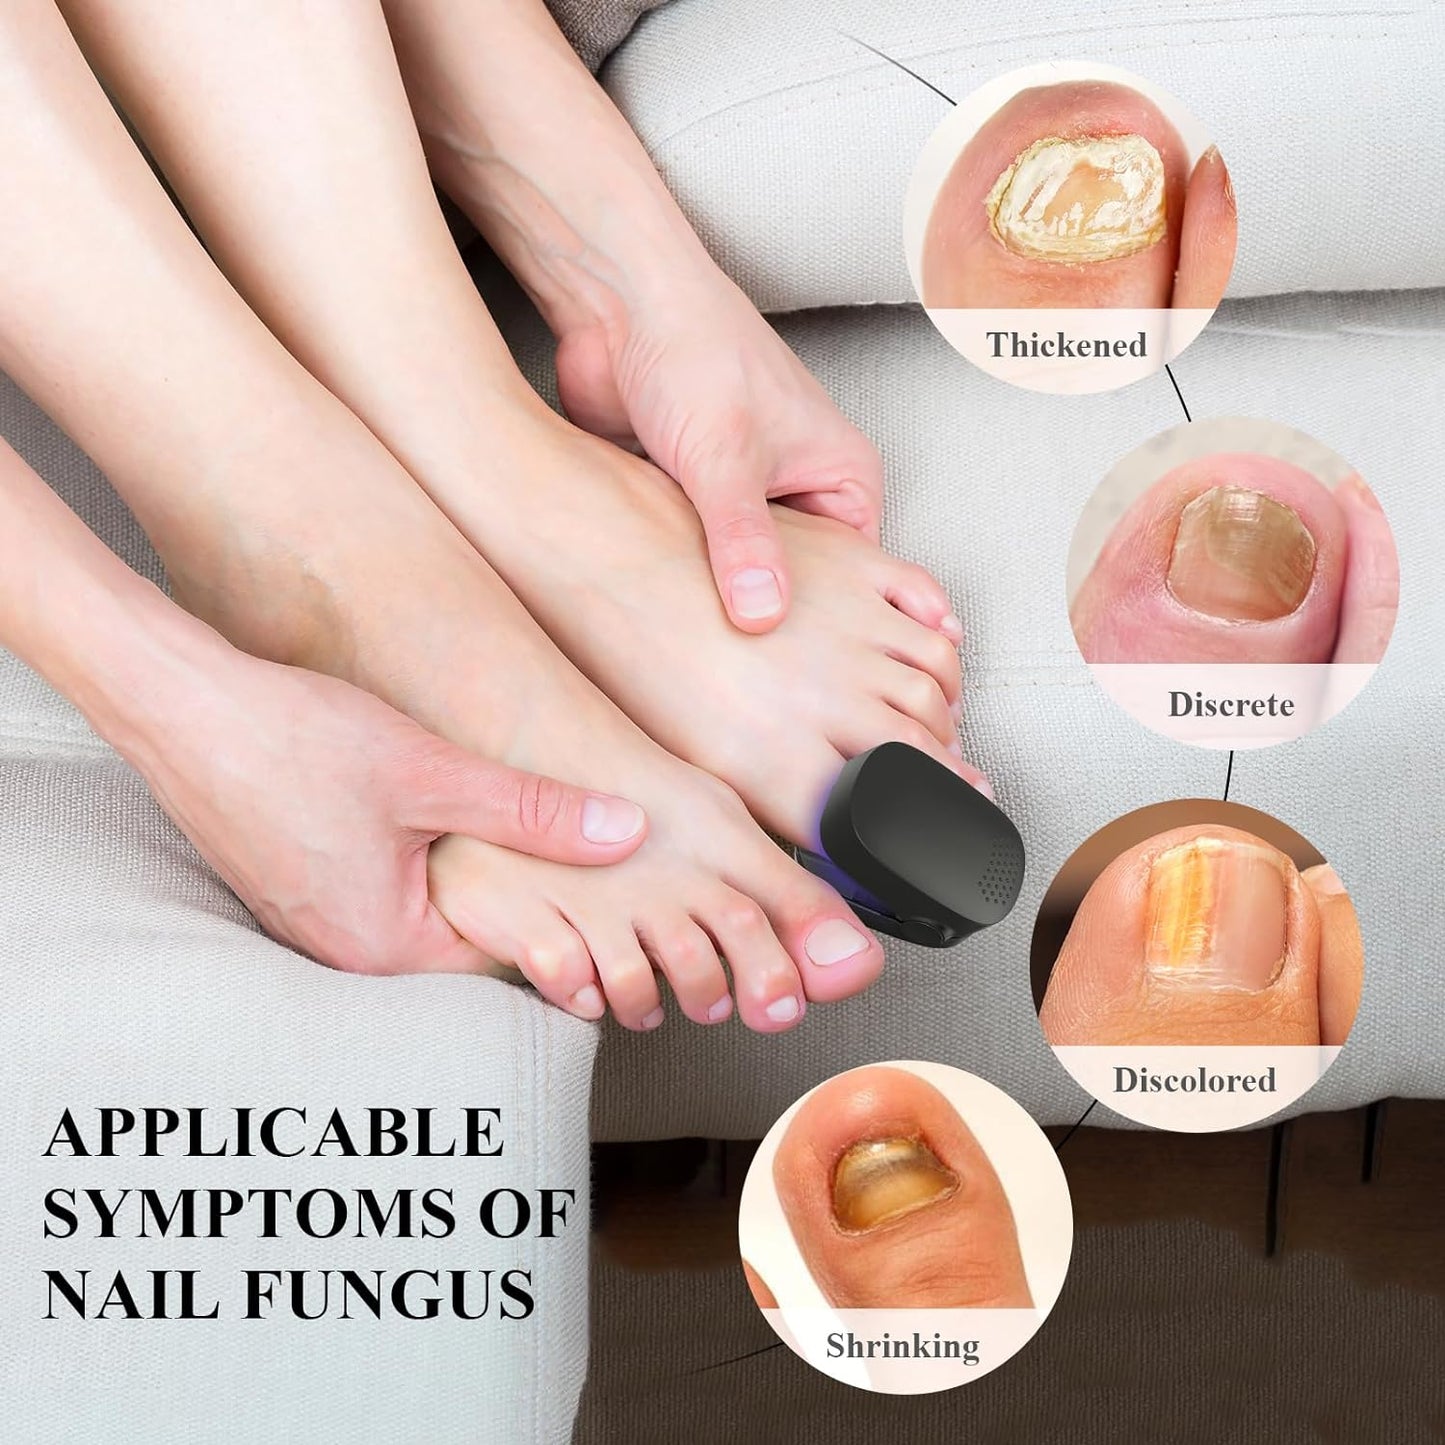 Jinta Nail Fungus Cleaning Laser Device, Nail Fungus Treatment for Fingernails and Toenails with Onychomycosis, Effectively Improve Damaged, Discolored and Thickened Nails, Suitable for Home Use